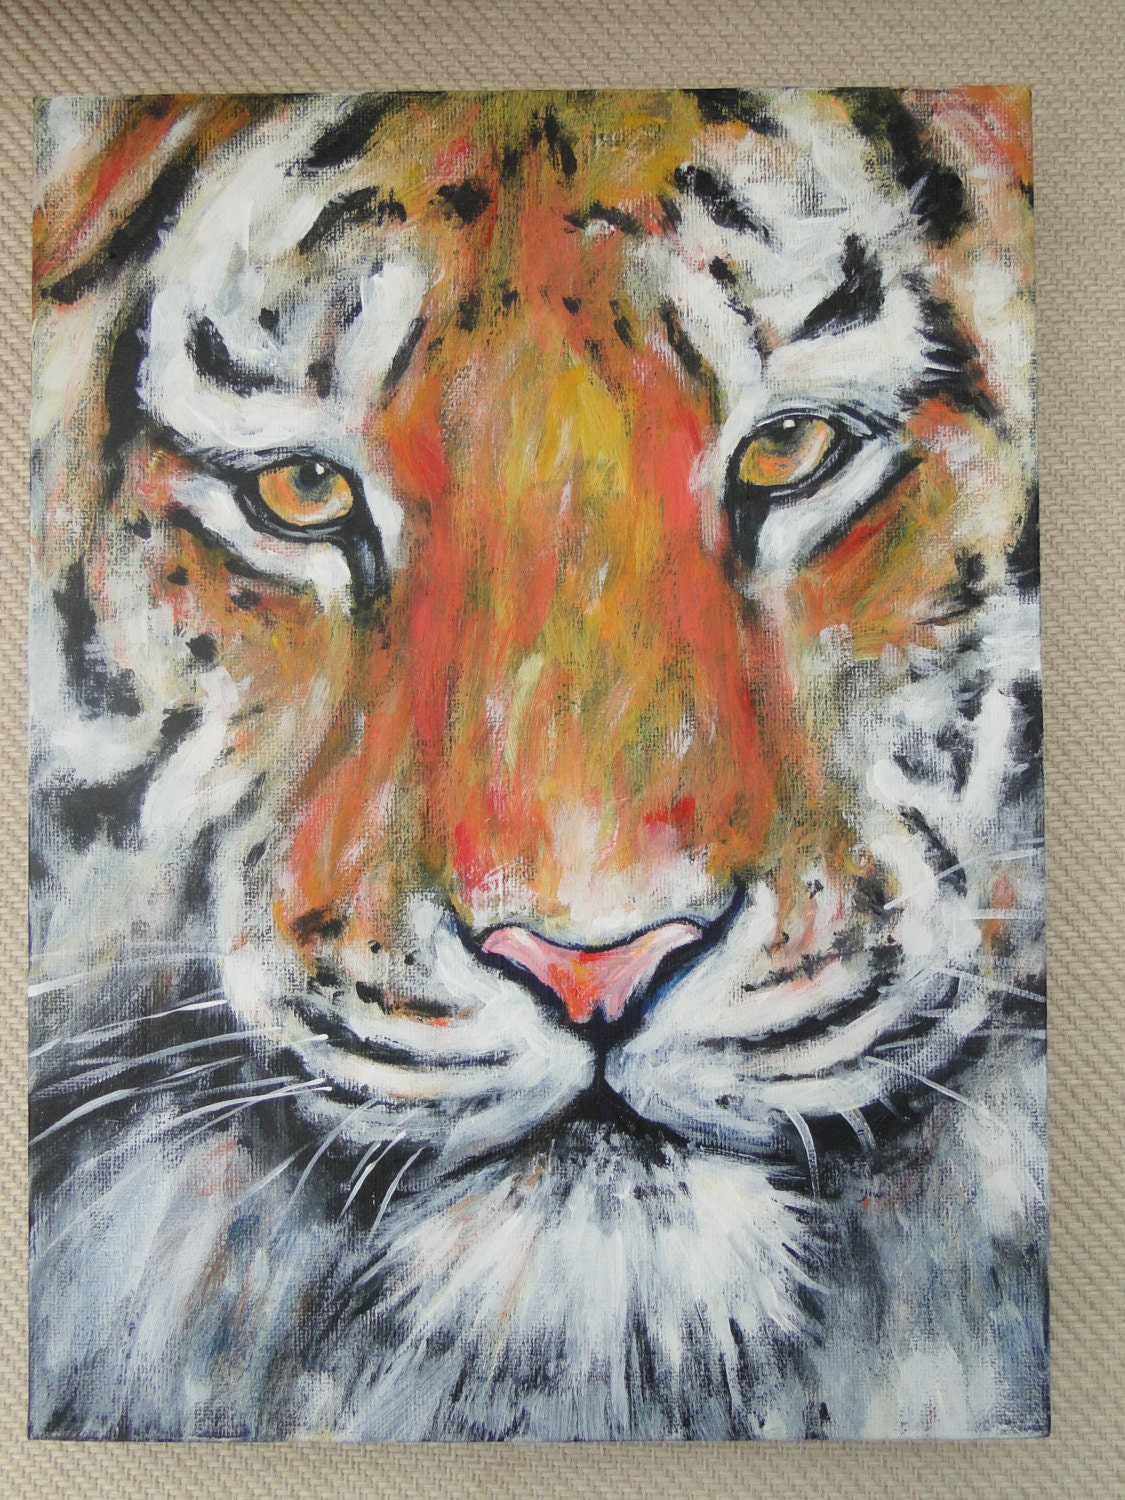  Cat  painting Tiger Original Acrylic Painting on Canvas OOAK